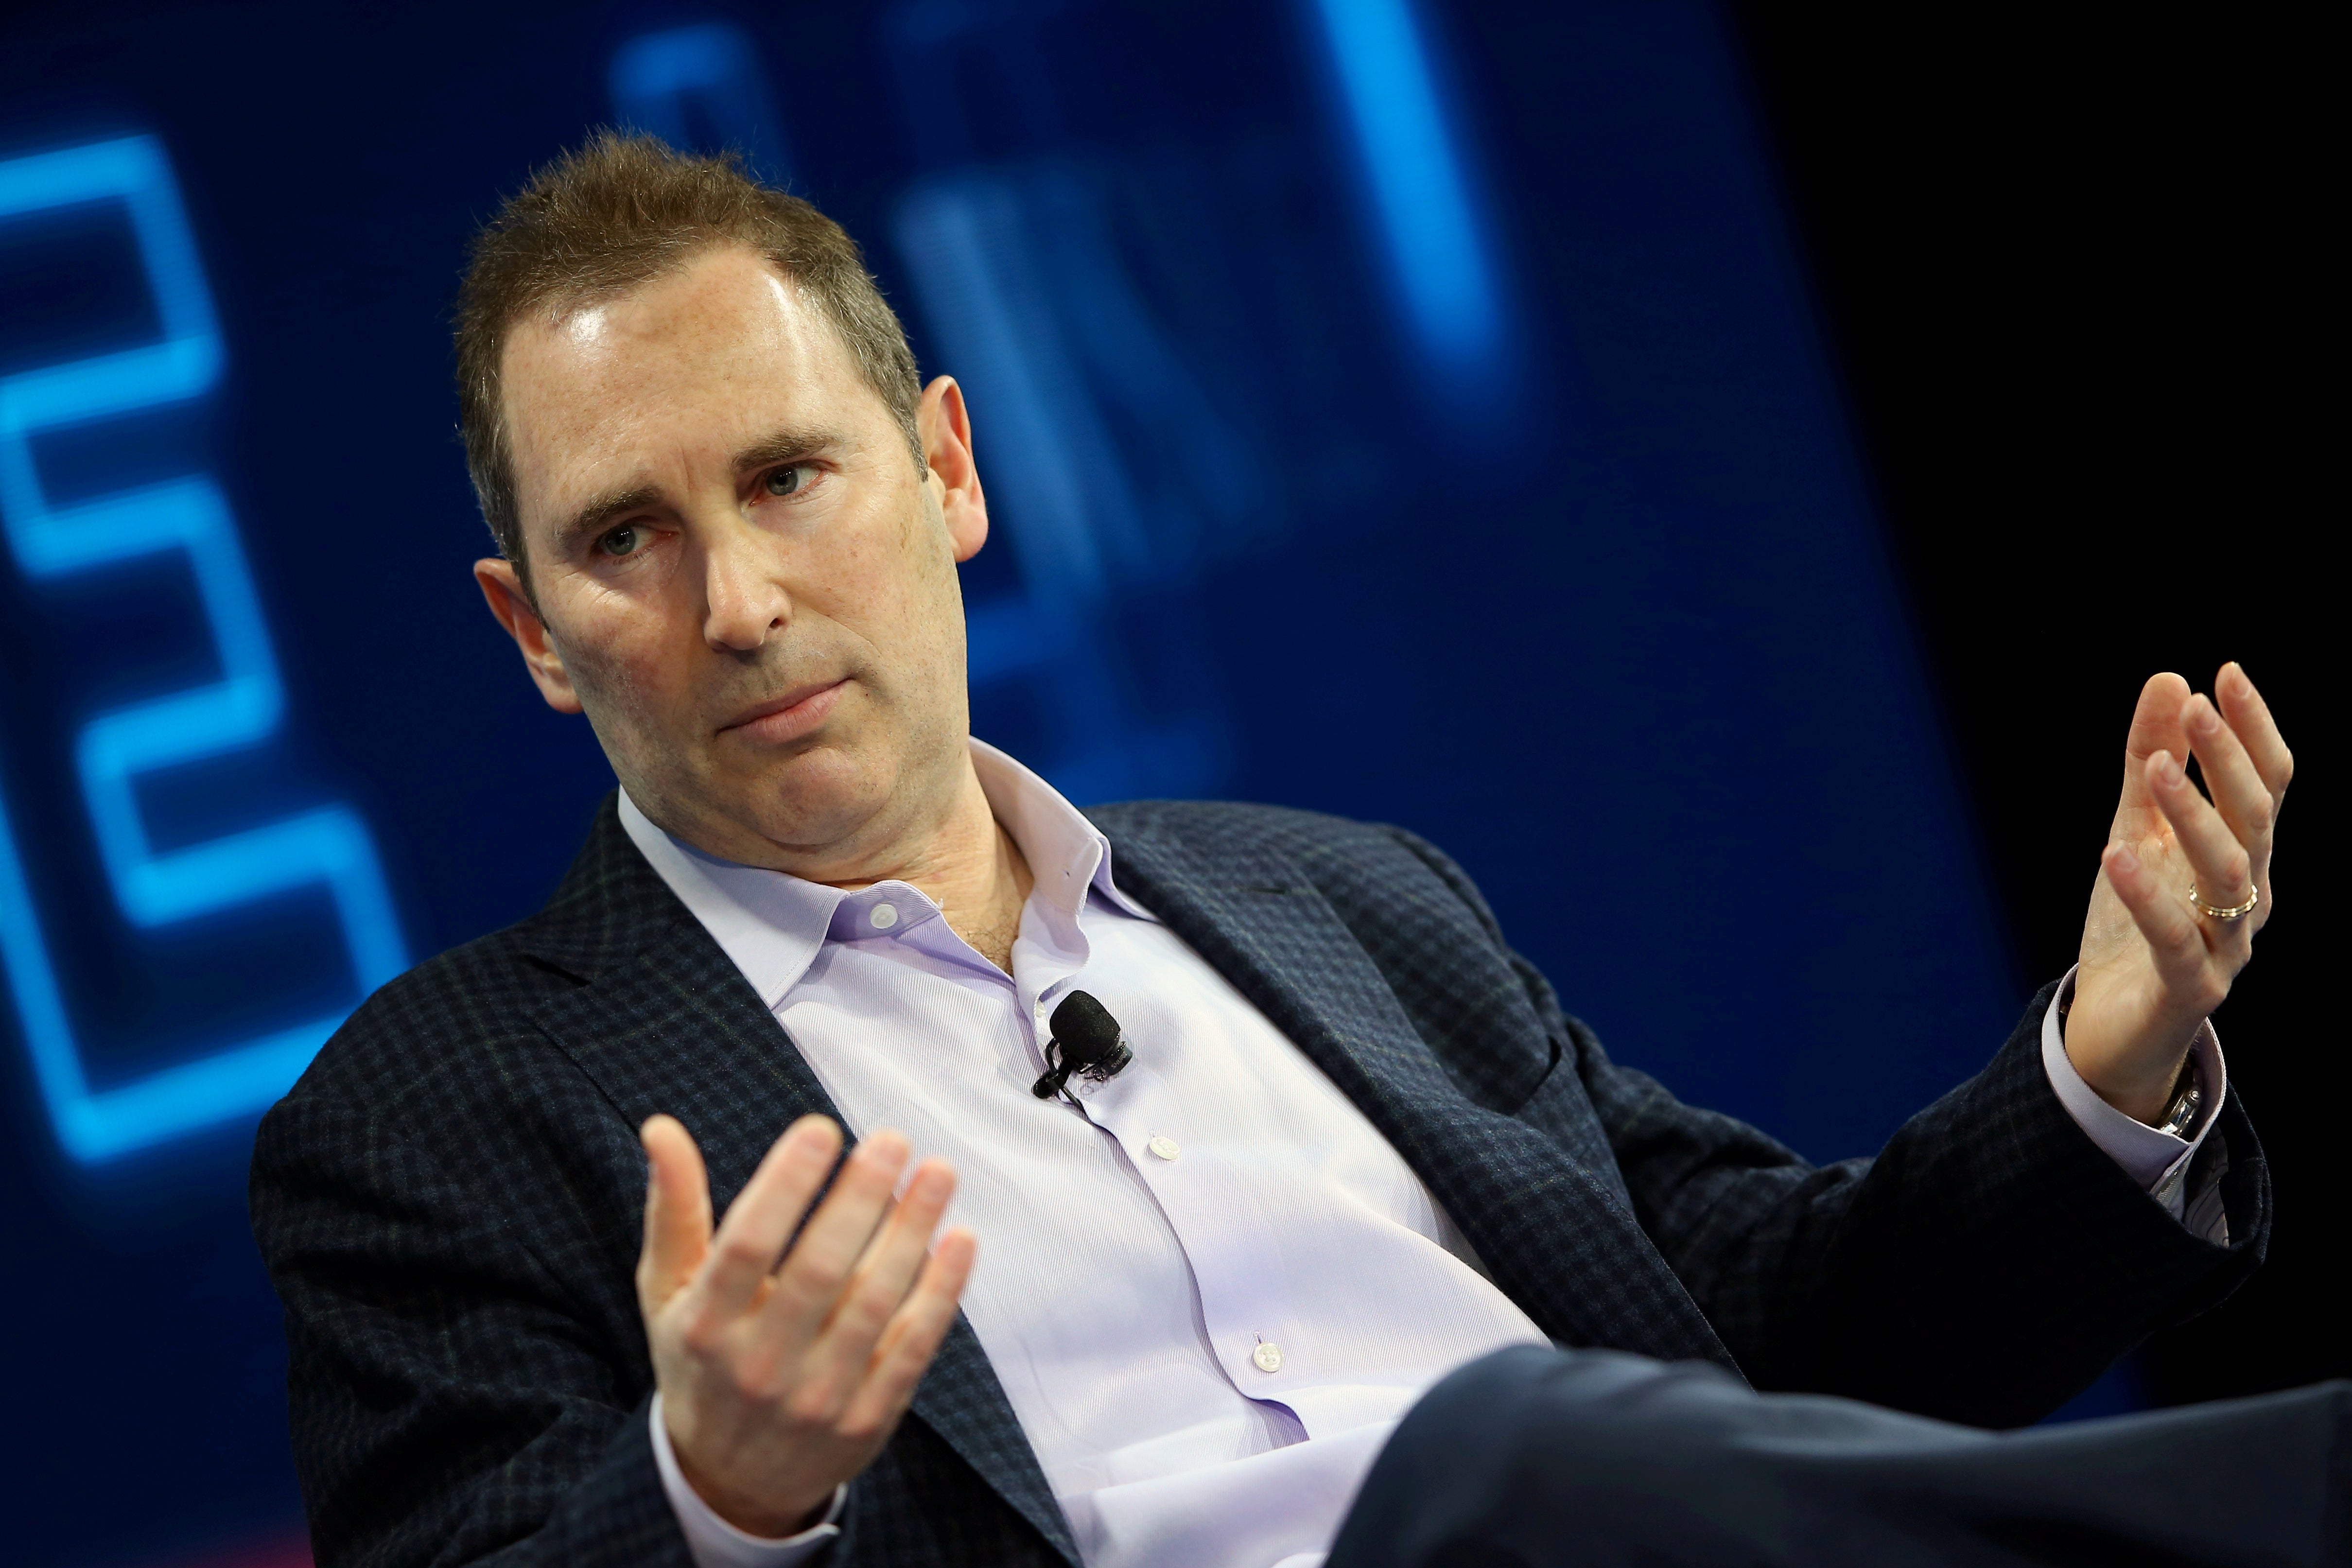 Andy Jassy, seated, gestures as he speaks onstage at a conference.